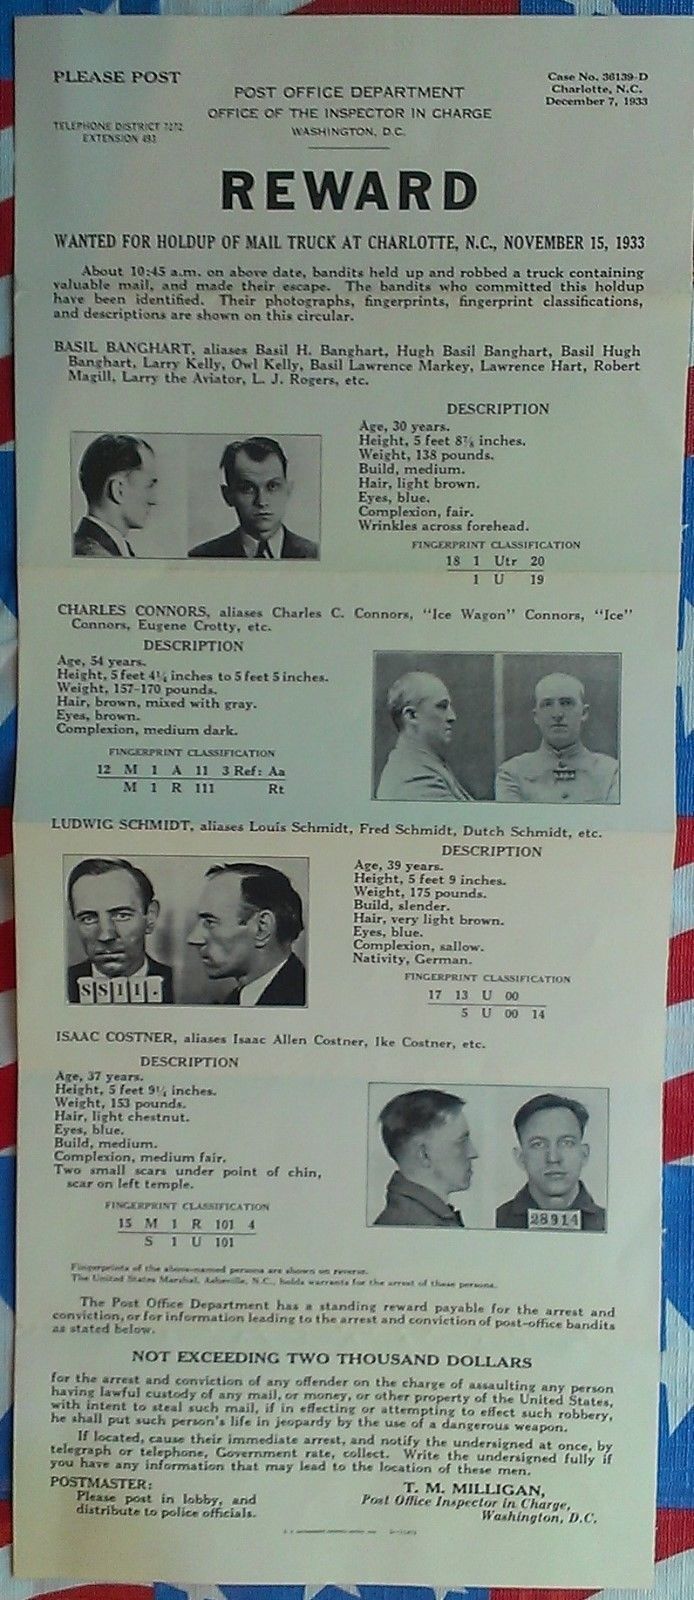 ONE OF THE RAREST MAFIA FBI WANTED POSTERS, AL CAPONE/ROGER TOUHY, FEW EXIST